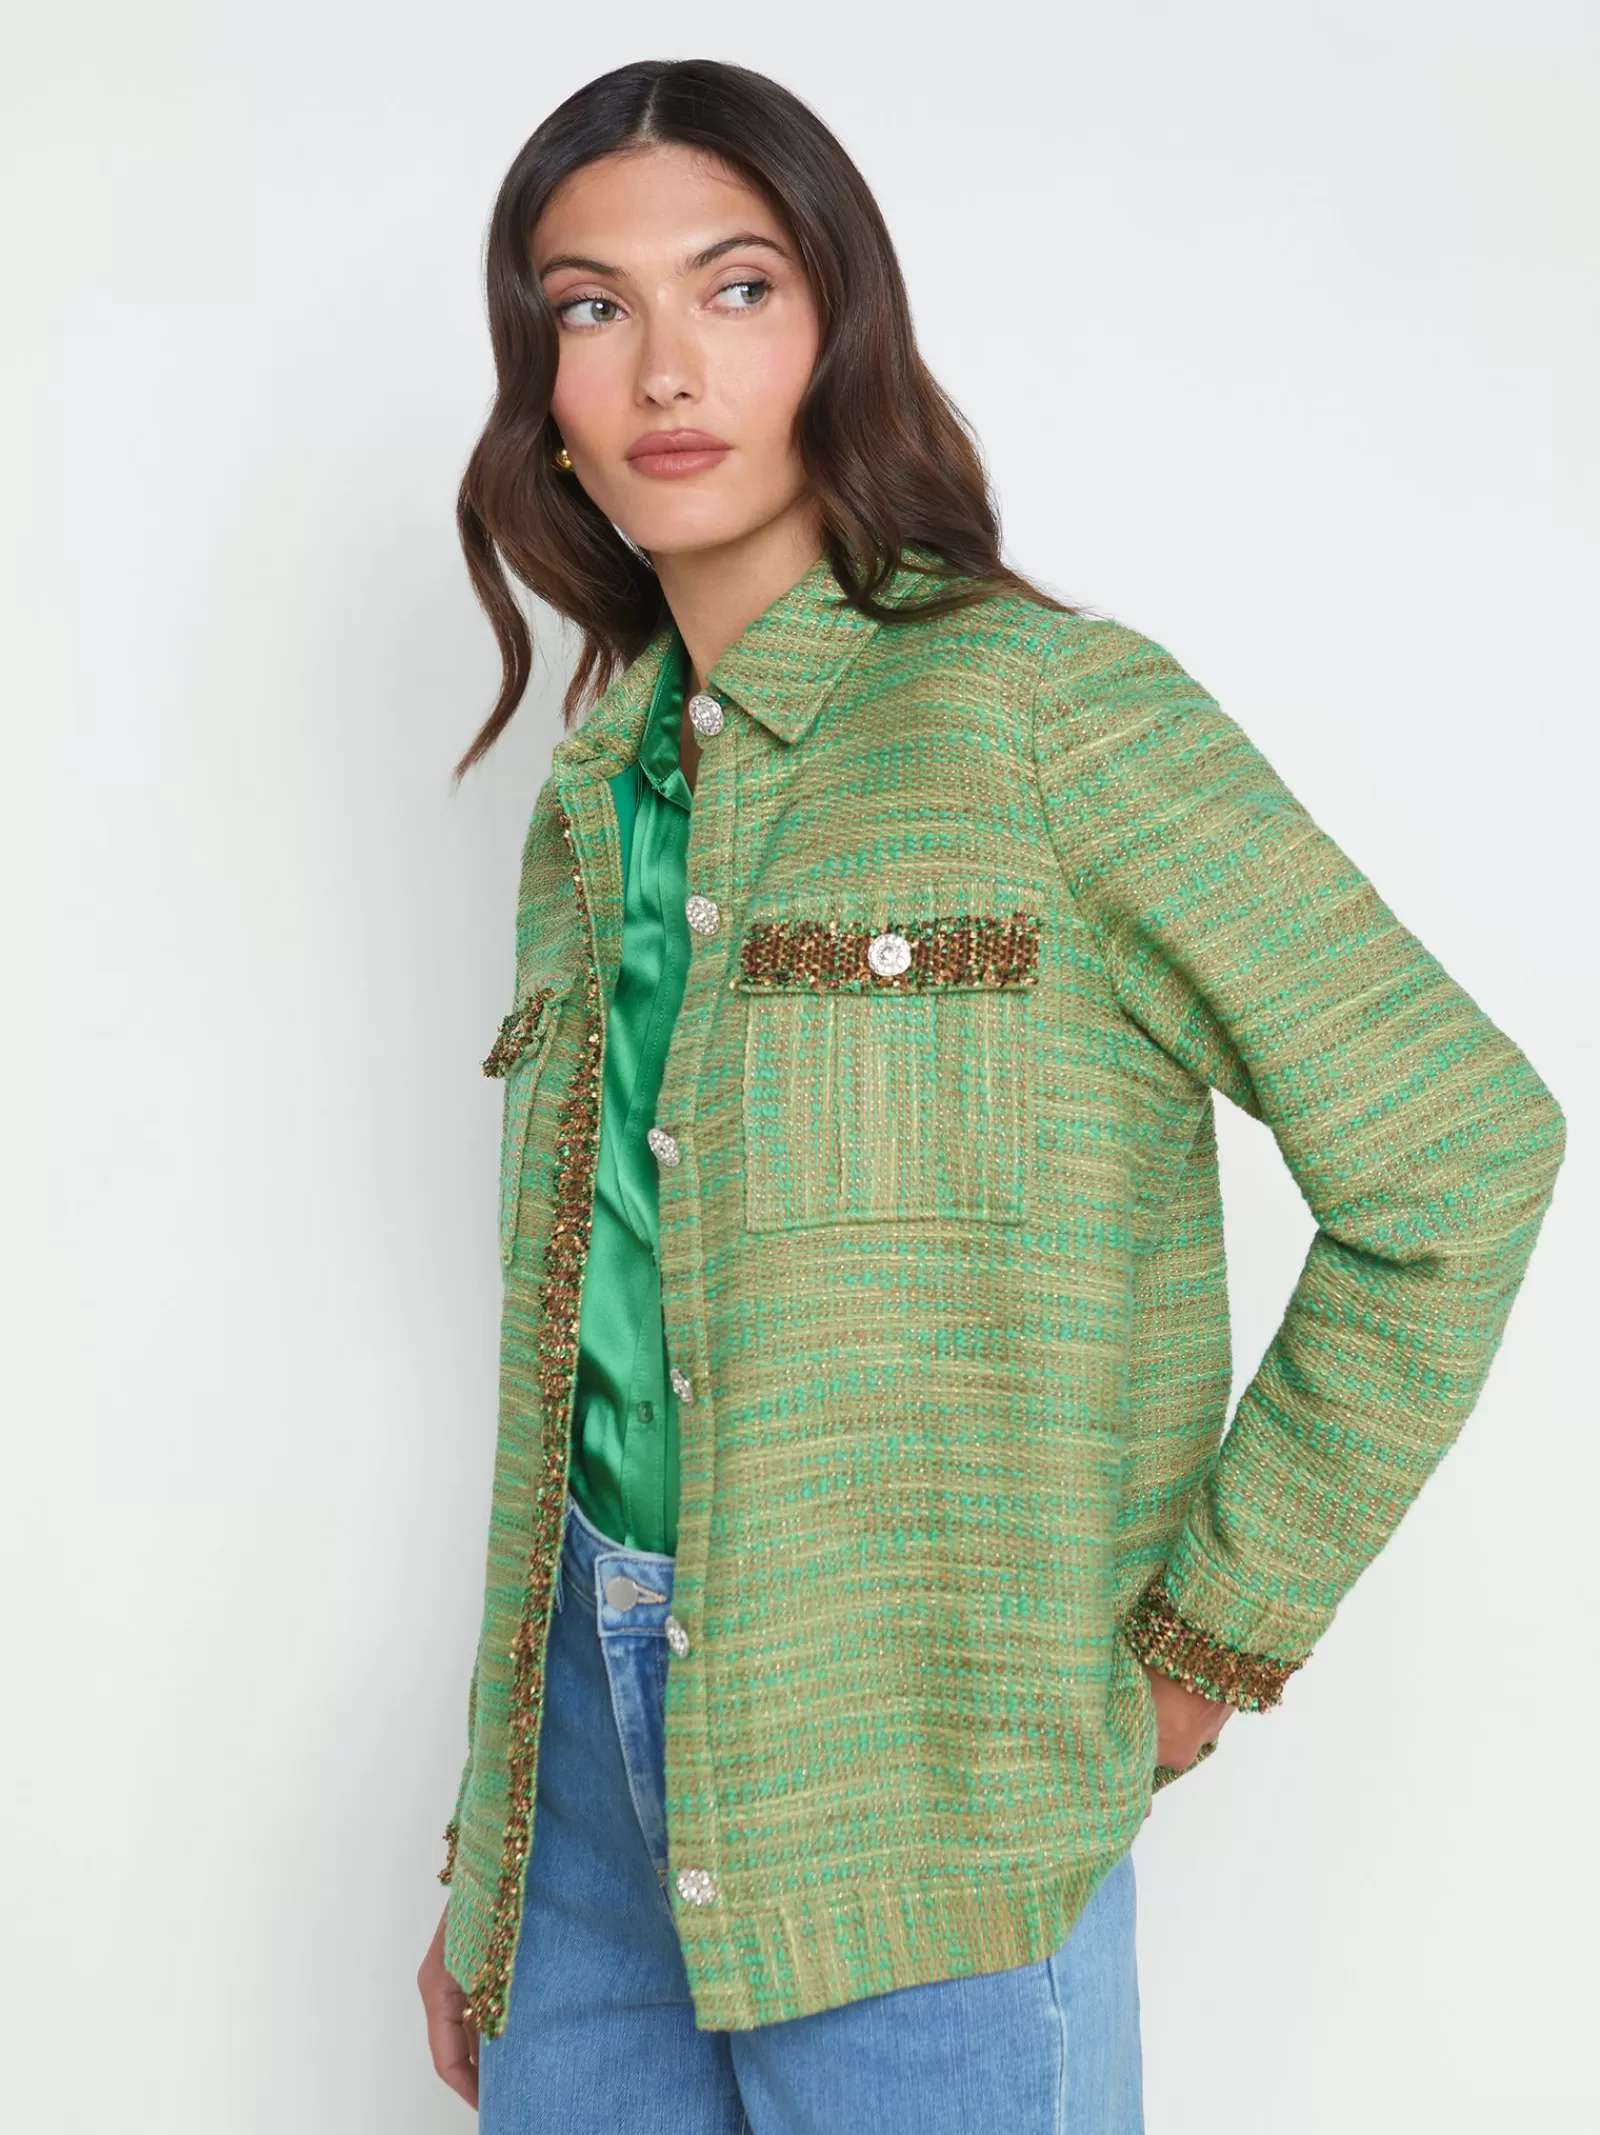 L'AGENCE Jeanine Tweed Shirt Jacket< Spring Collection | Best Sellers